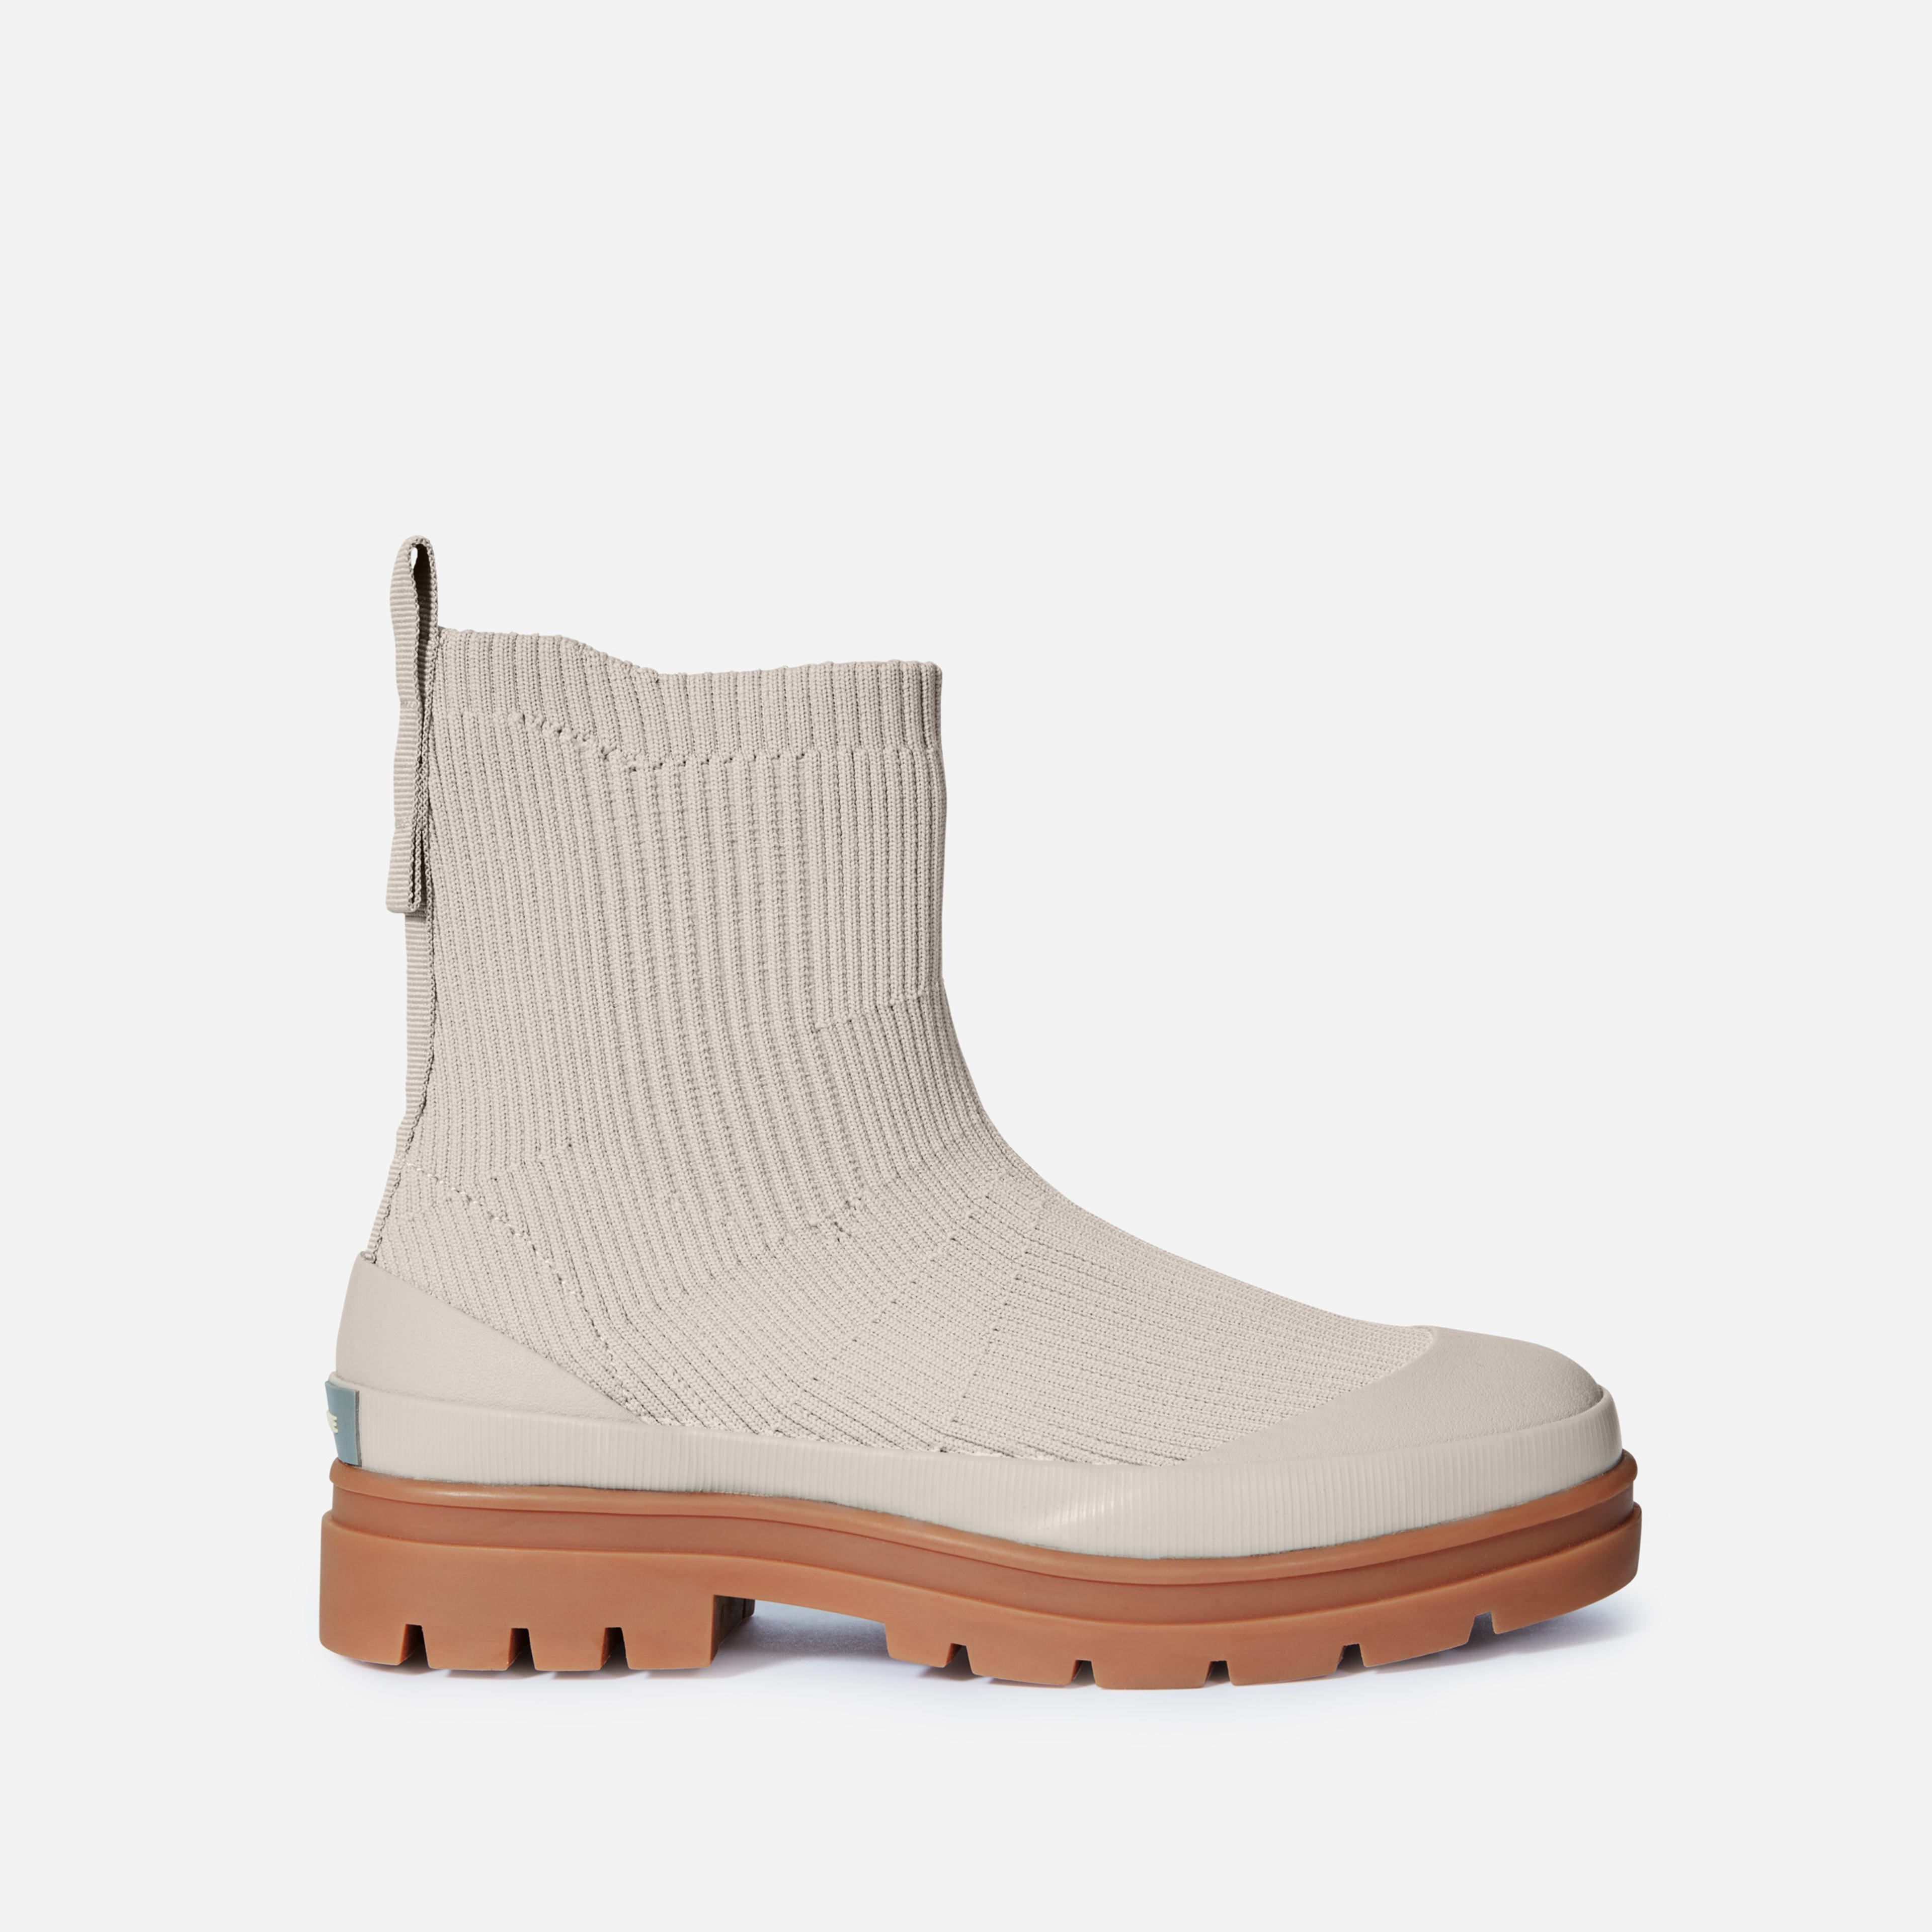 The Utility Boot in ReKnit | Everlane